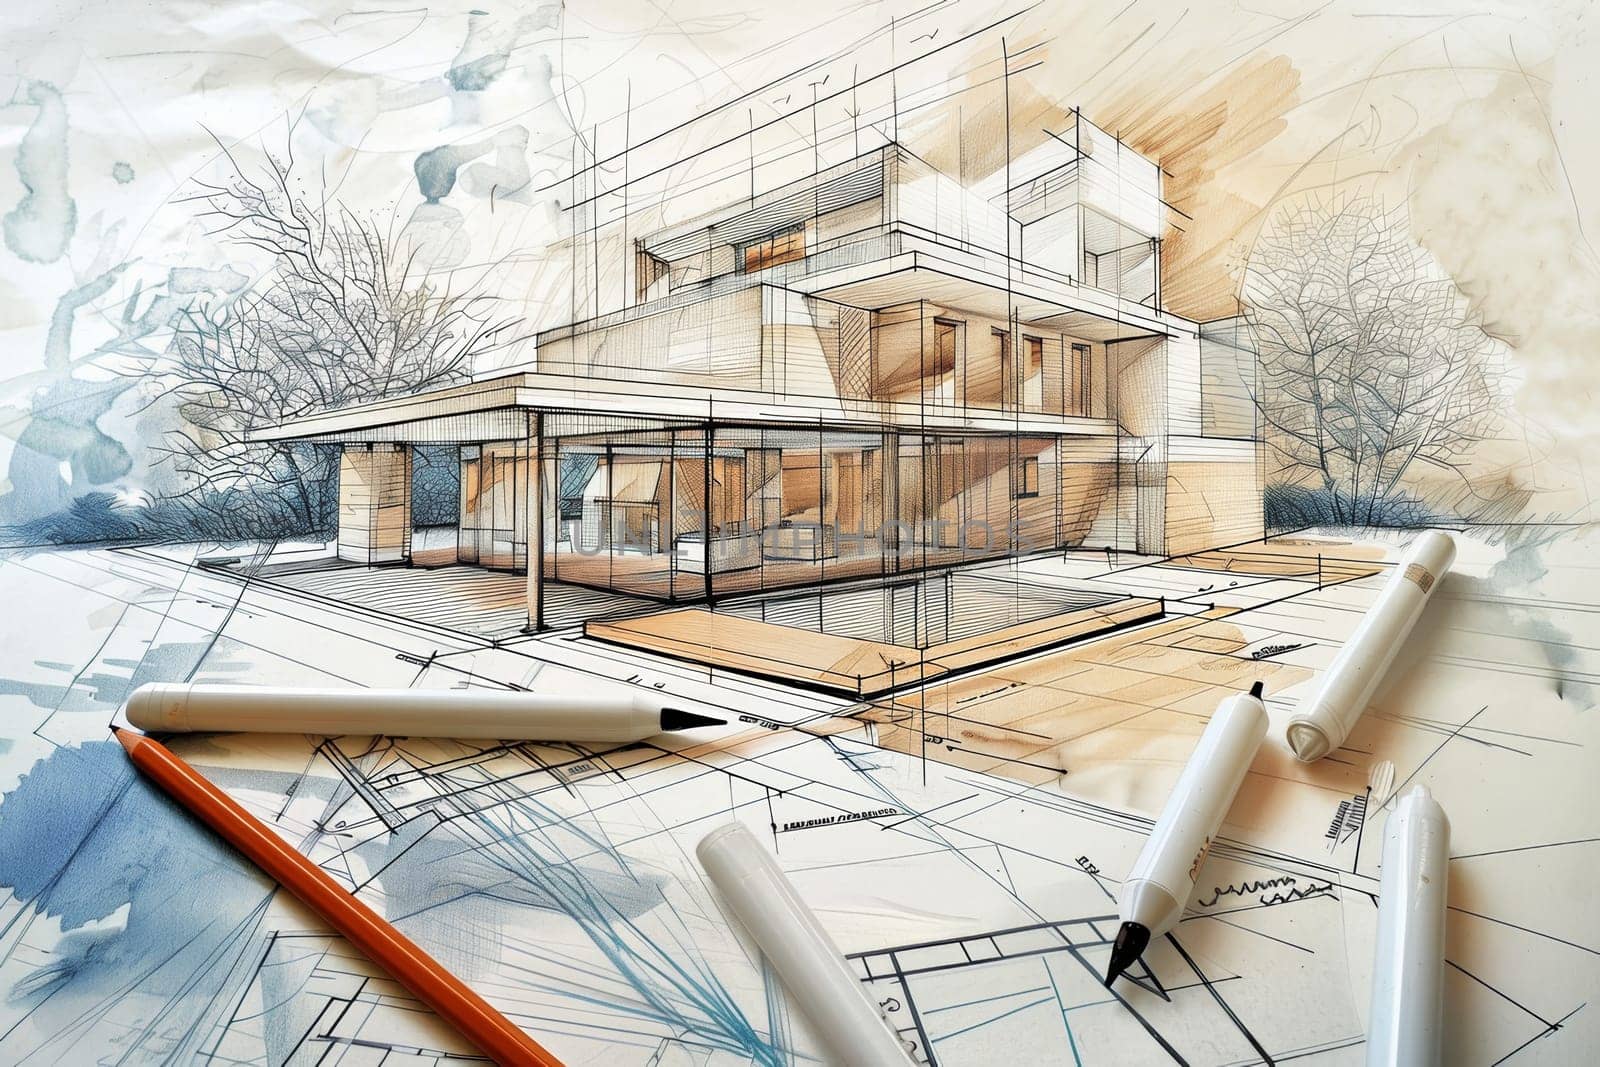 A playful illustration of a house resting atop a table, showcasing creative architectural design and renovation ideas.